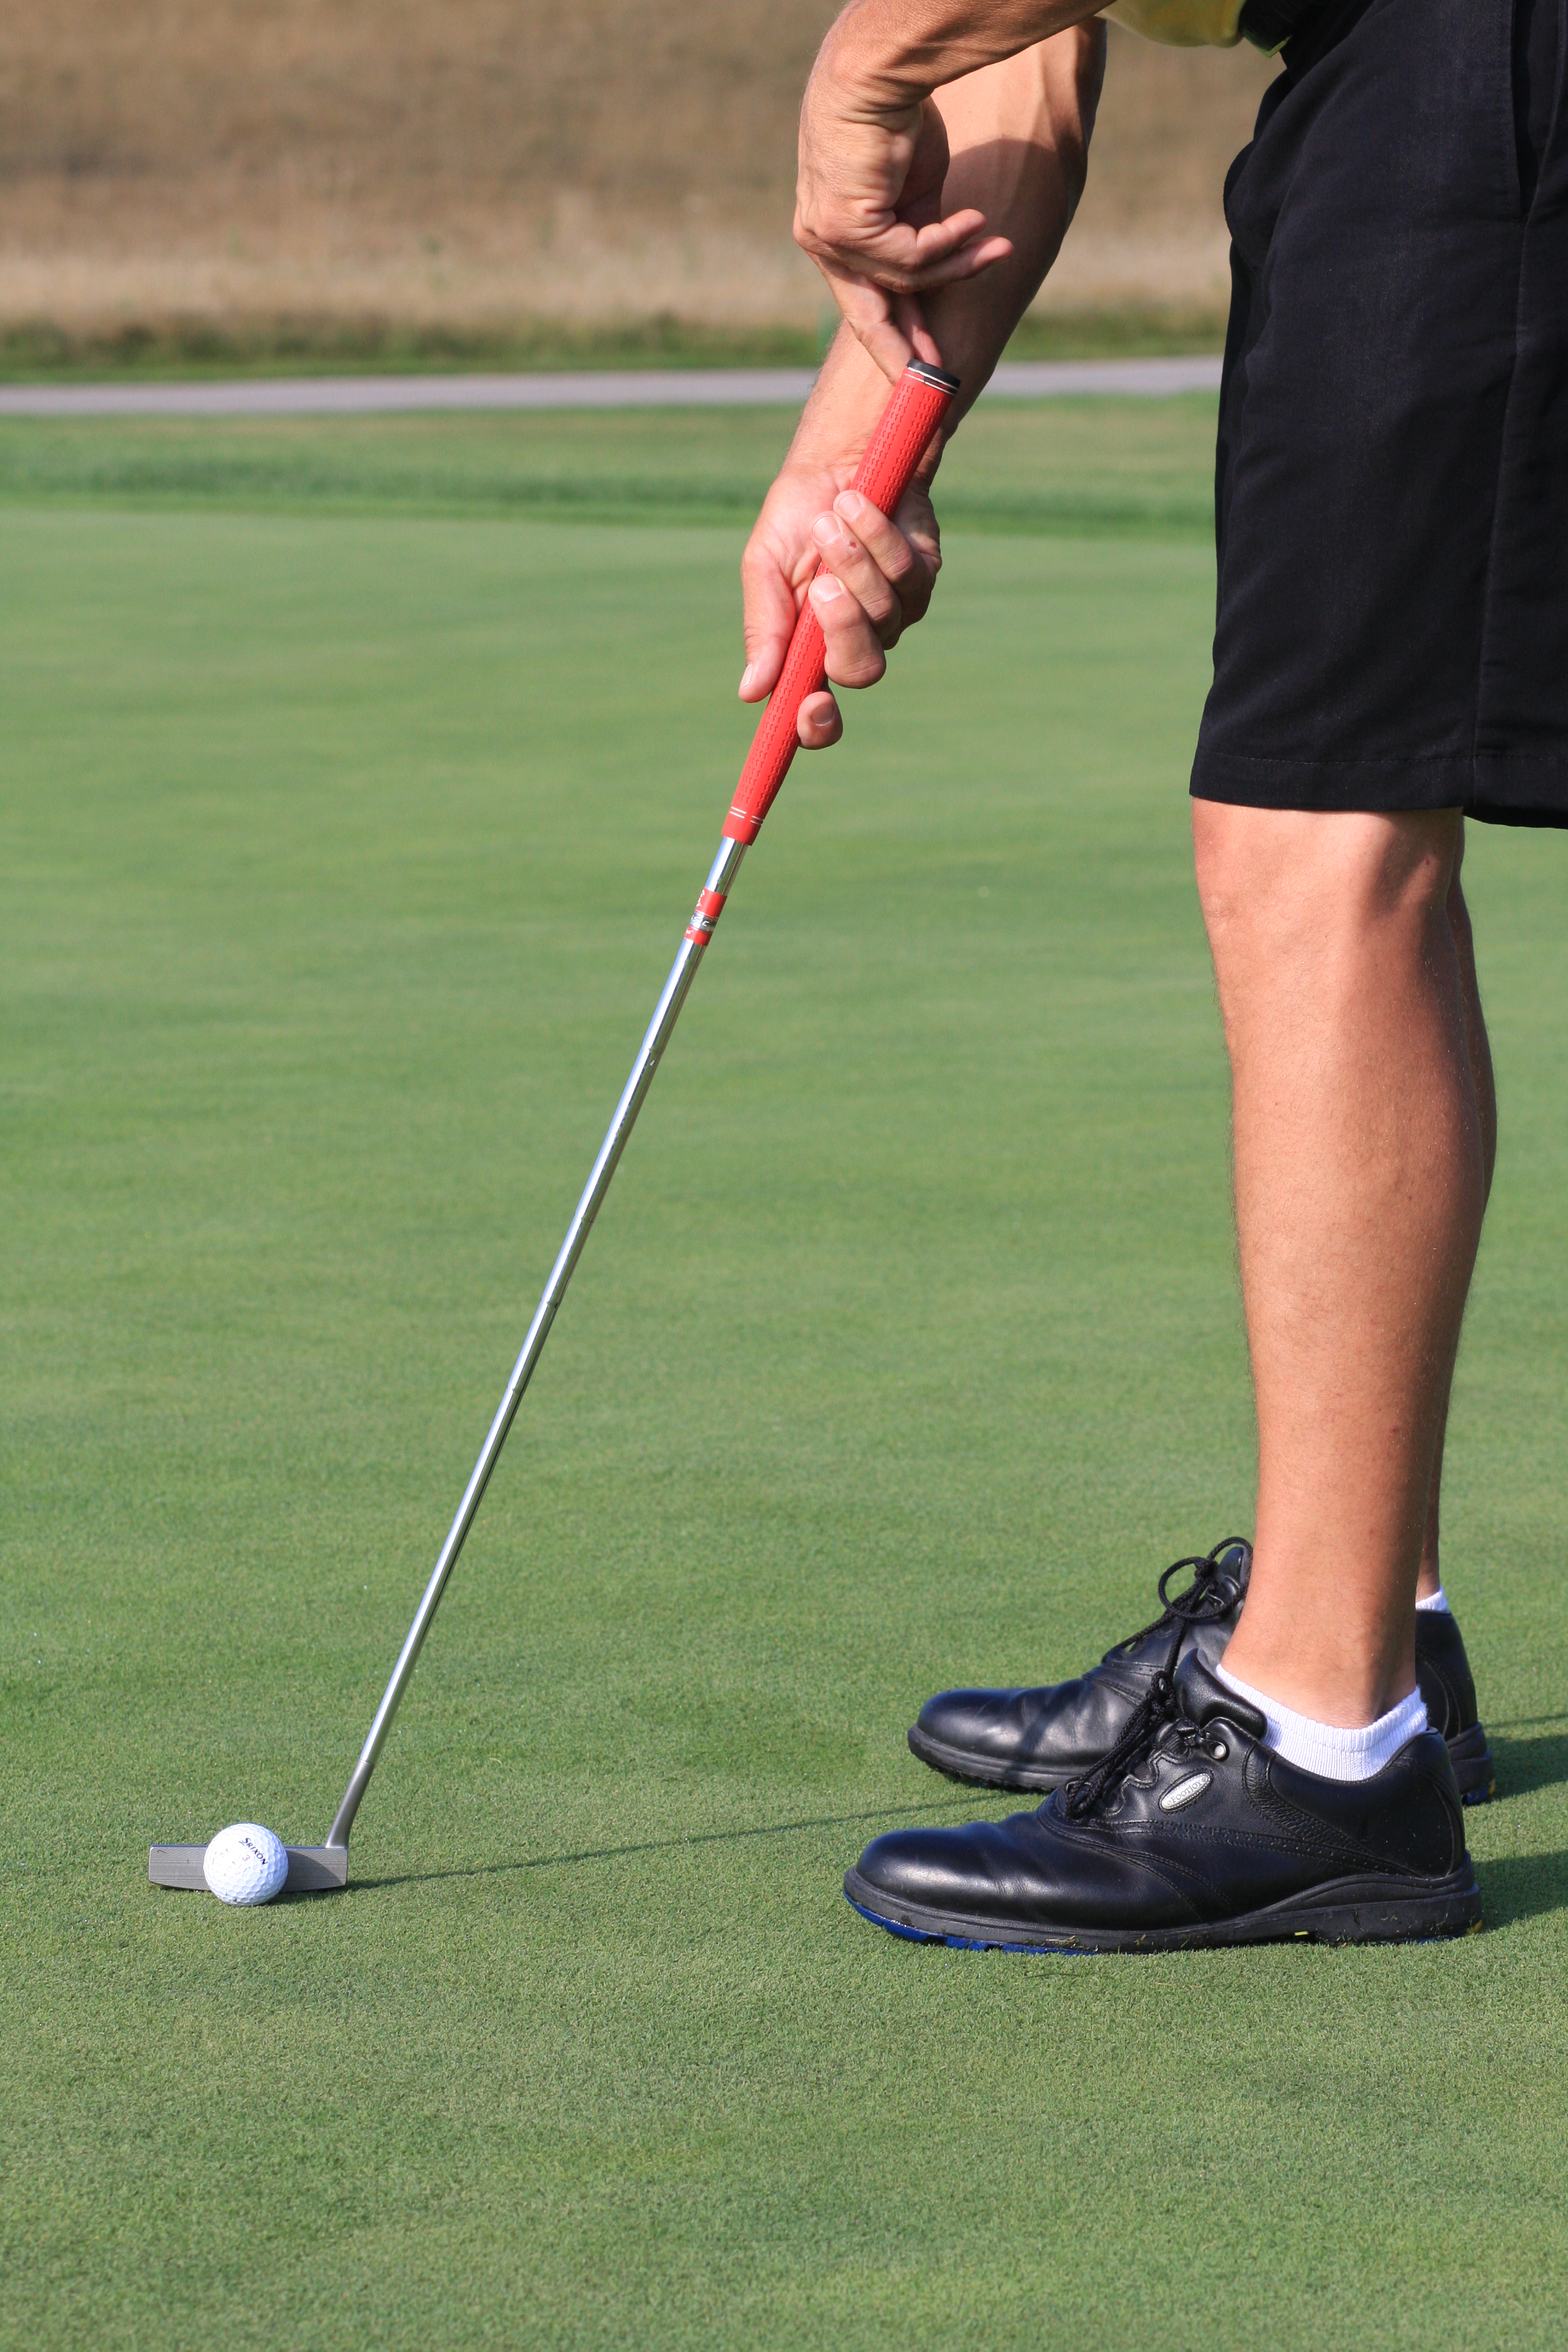 How to Hold your Putter